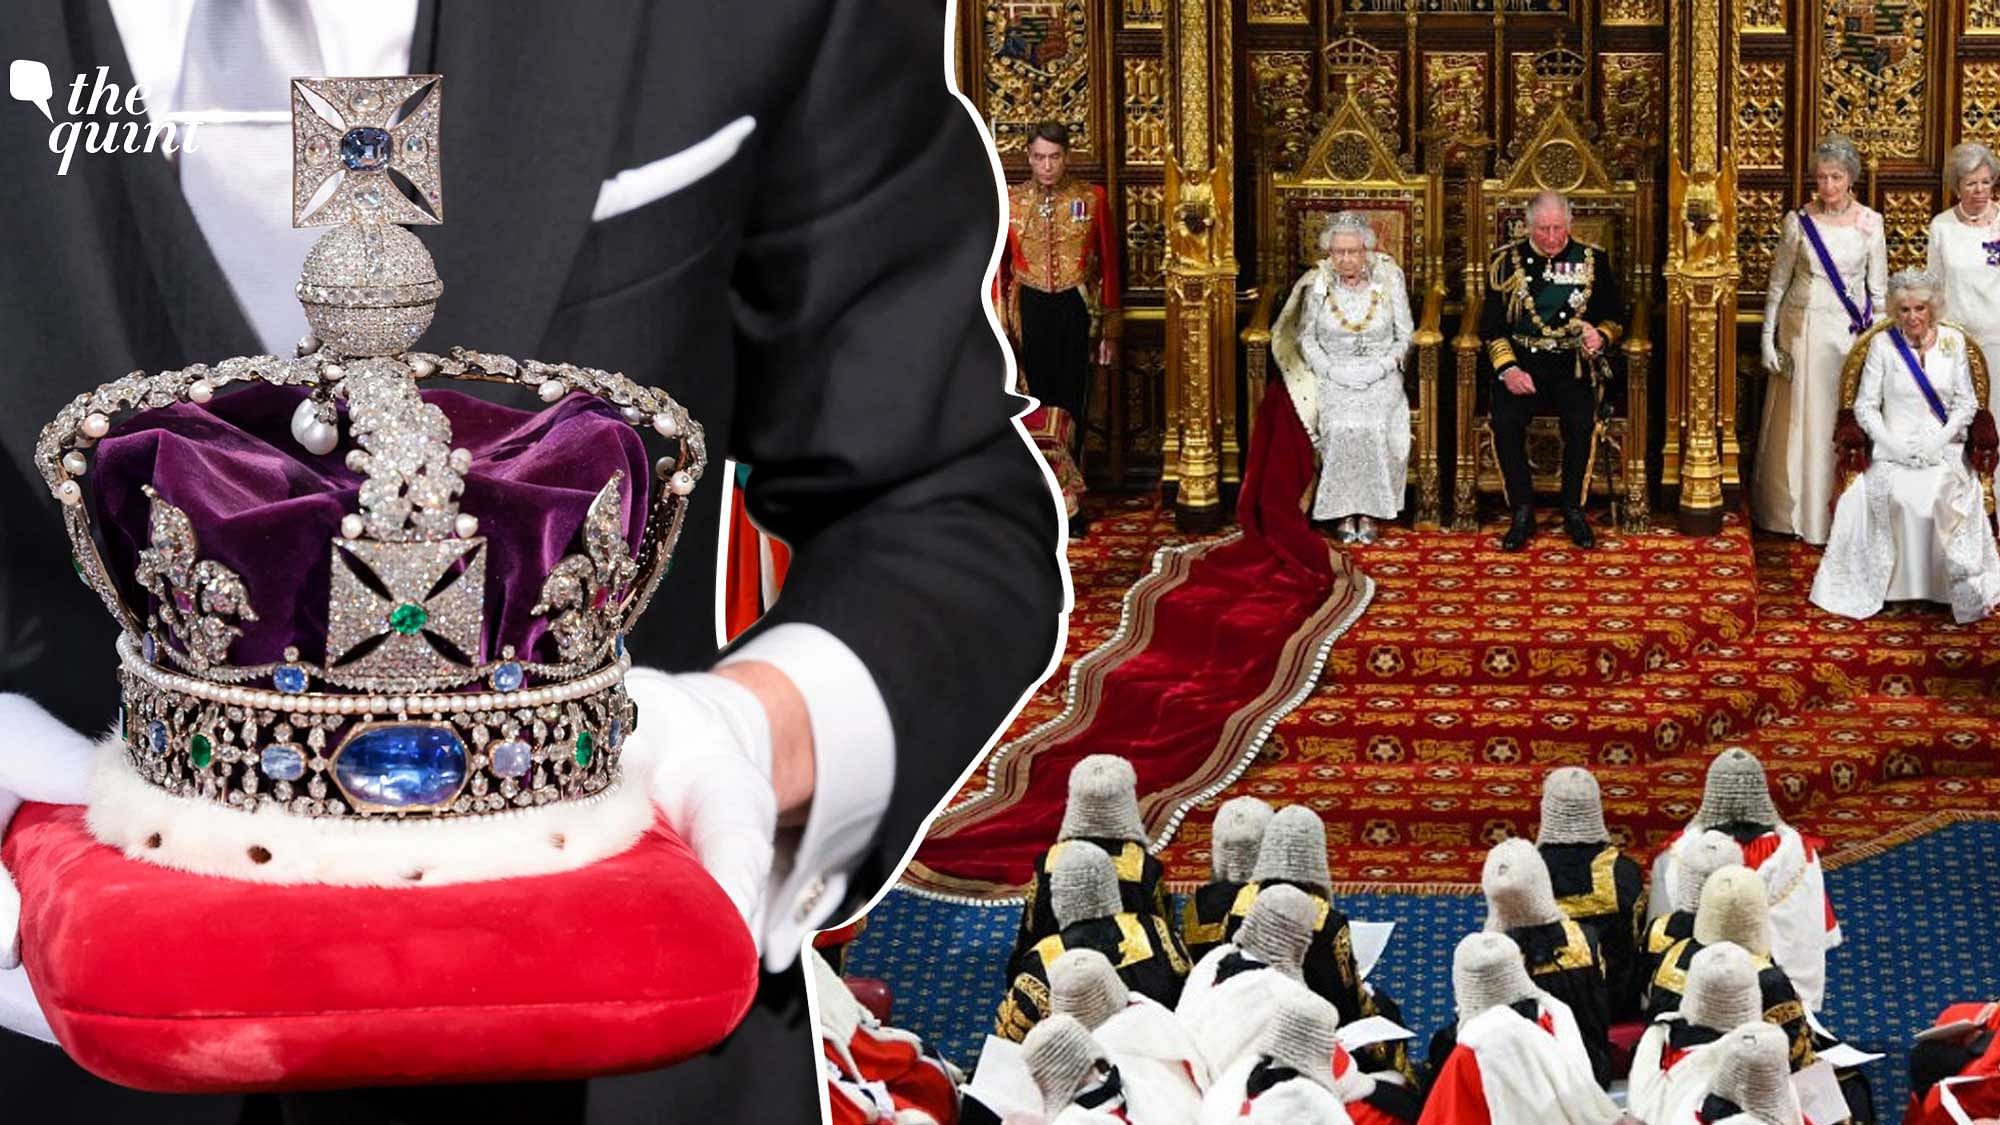 <div class="paragraphs"><p>The ceremonial may be splendid, but does the Crown deserve a future? Why should a modern democracy cleave to a hereditary head of state? The monarchy is a relic of times past and perhaps, this is the moment to look more carefully about whether it should survive when other outdated institutions such as the Empire have been dismantled.</p></div>